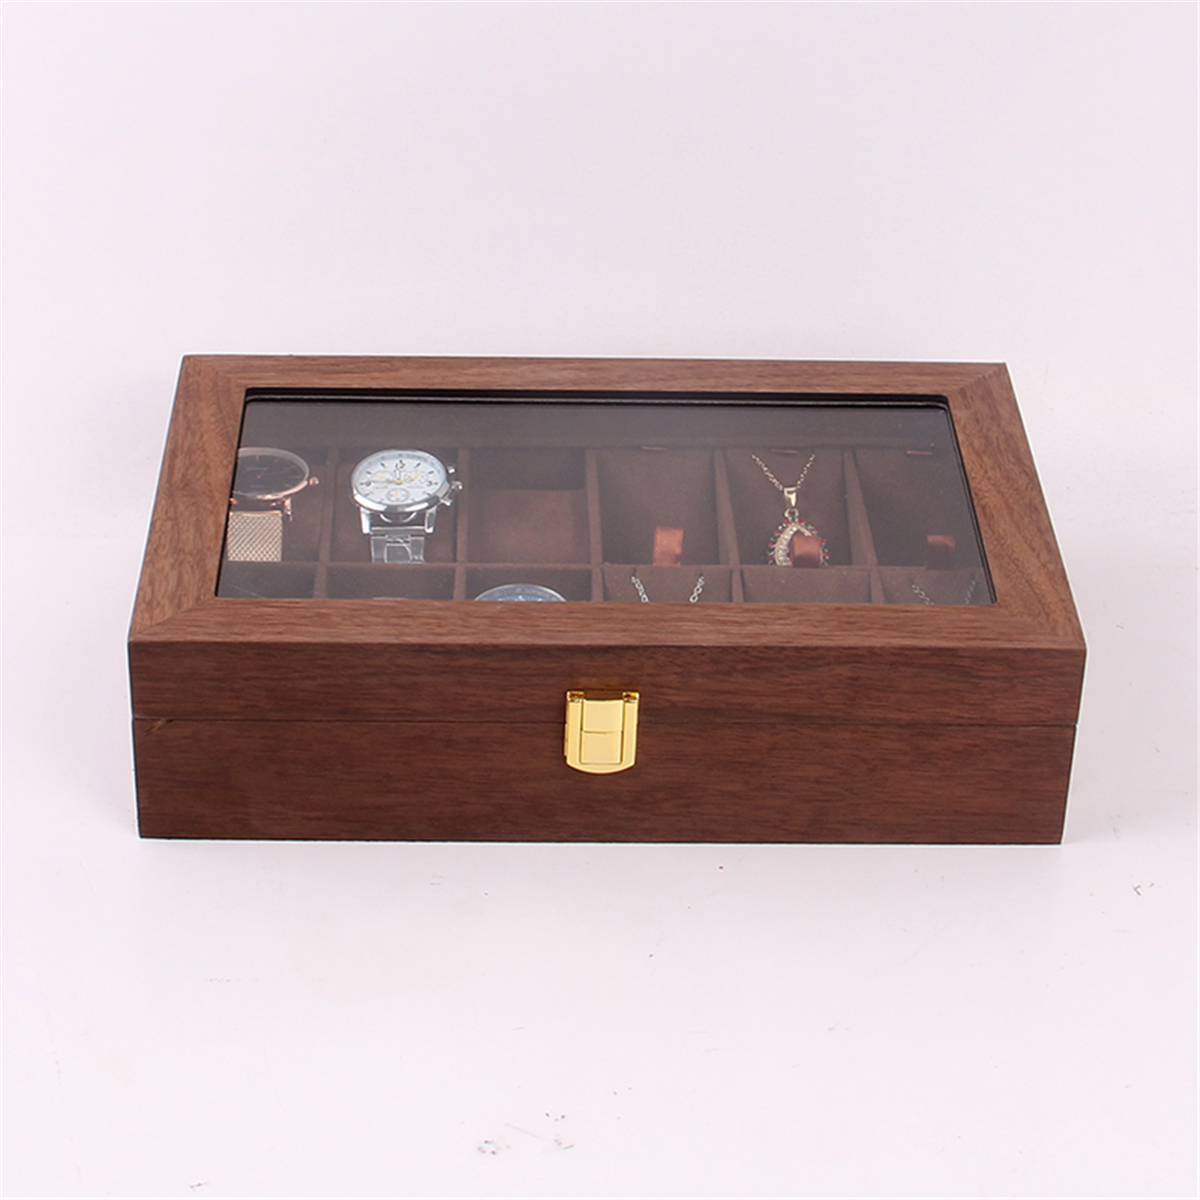 Woden-Watch-Boxes-Necklace-Jewelry-Watch-Display-Box-1658187-10